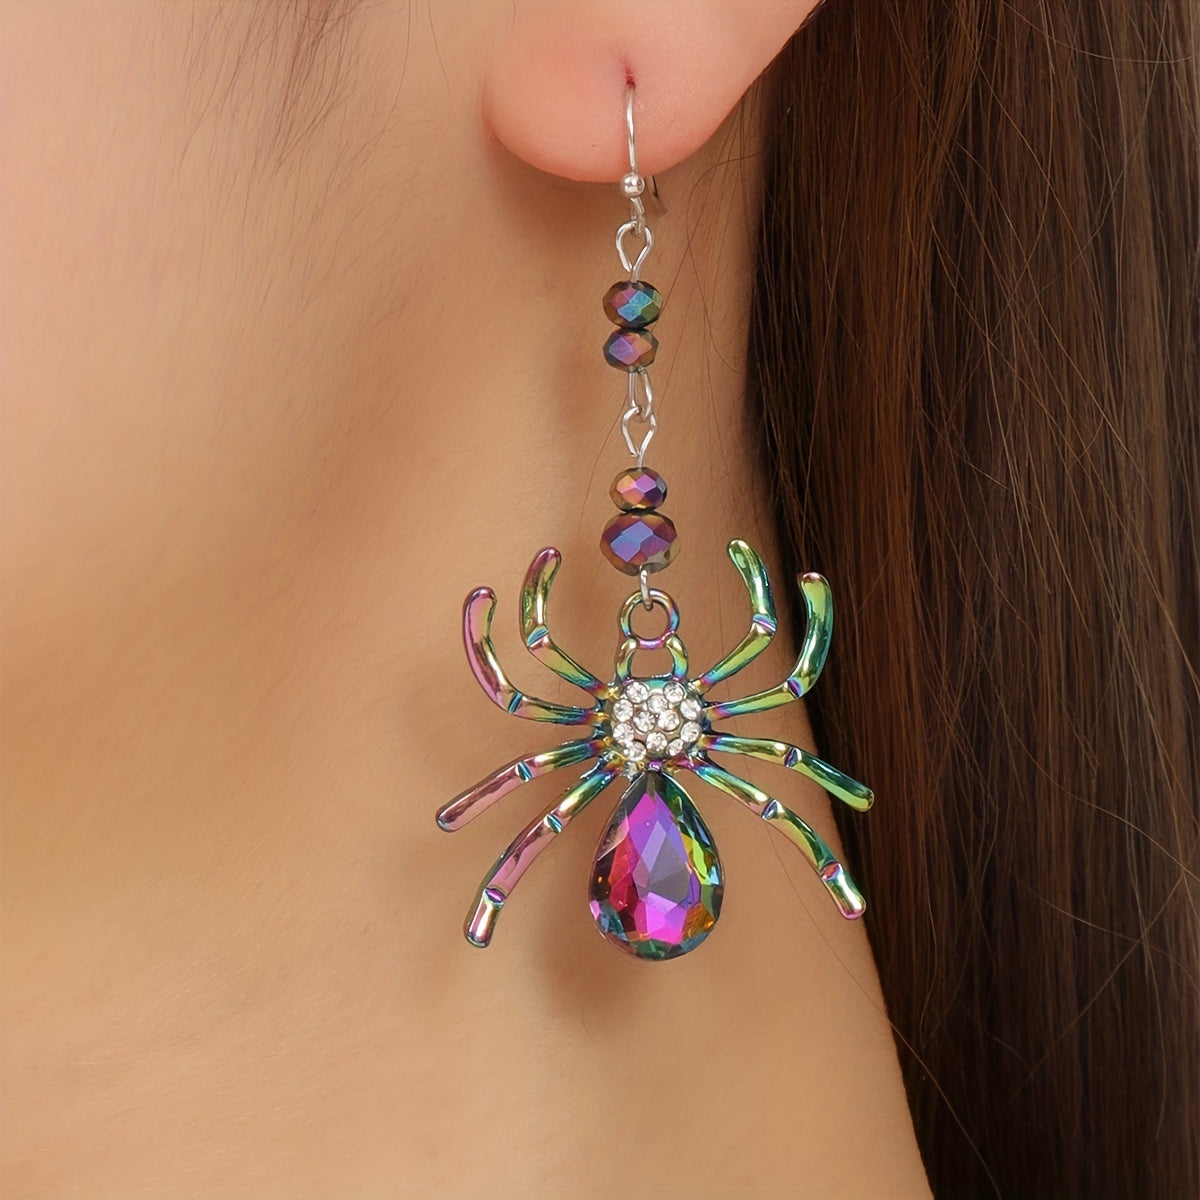 Halloween Colorful Rhinestone Spider Design Dangle Earrings Cute Vocation Style Zinc Alloy Jewelry Female Gift